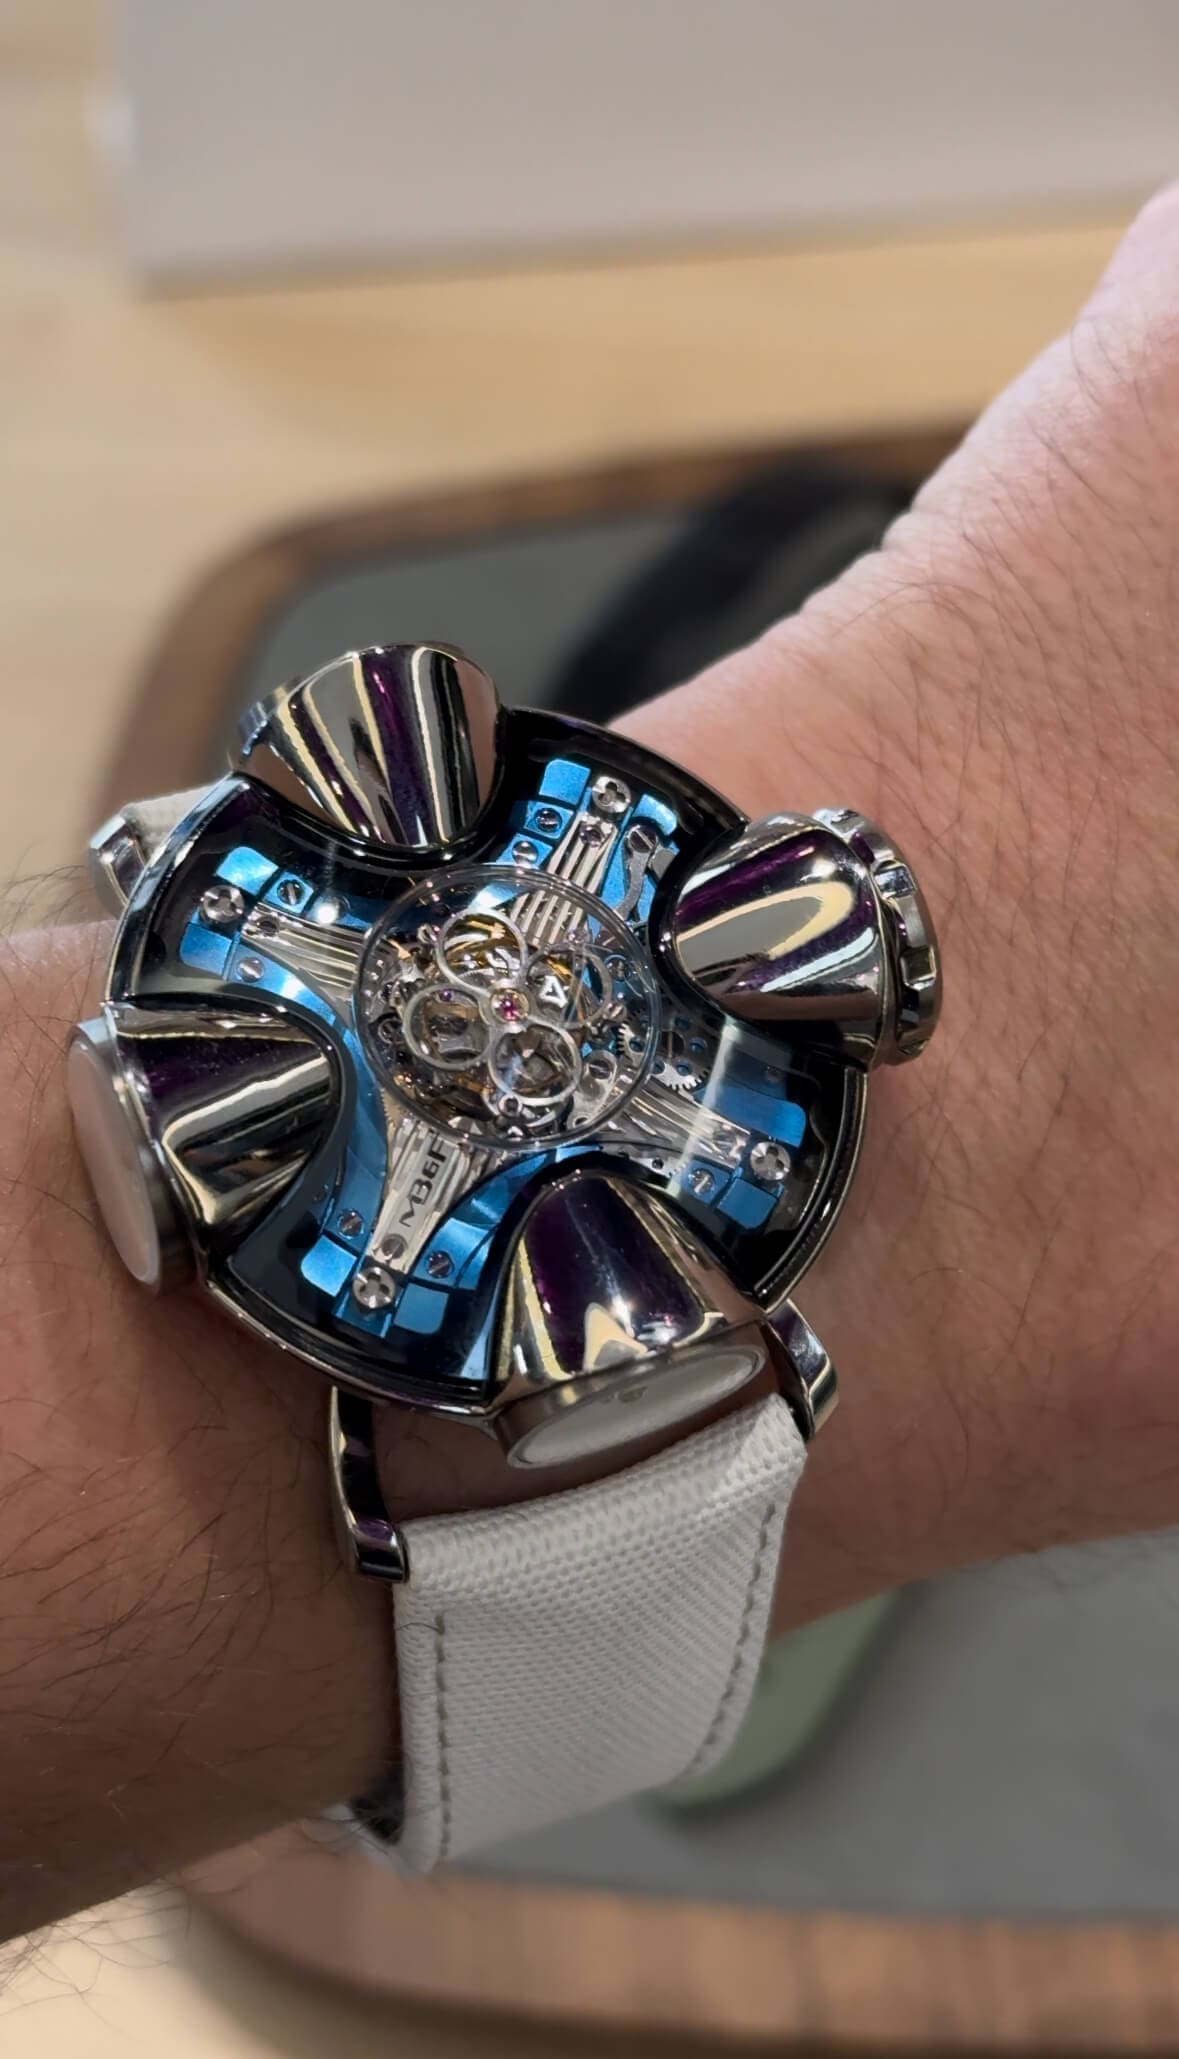 MB&F HM11